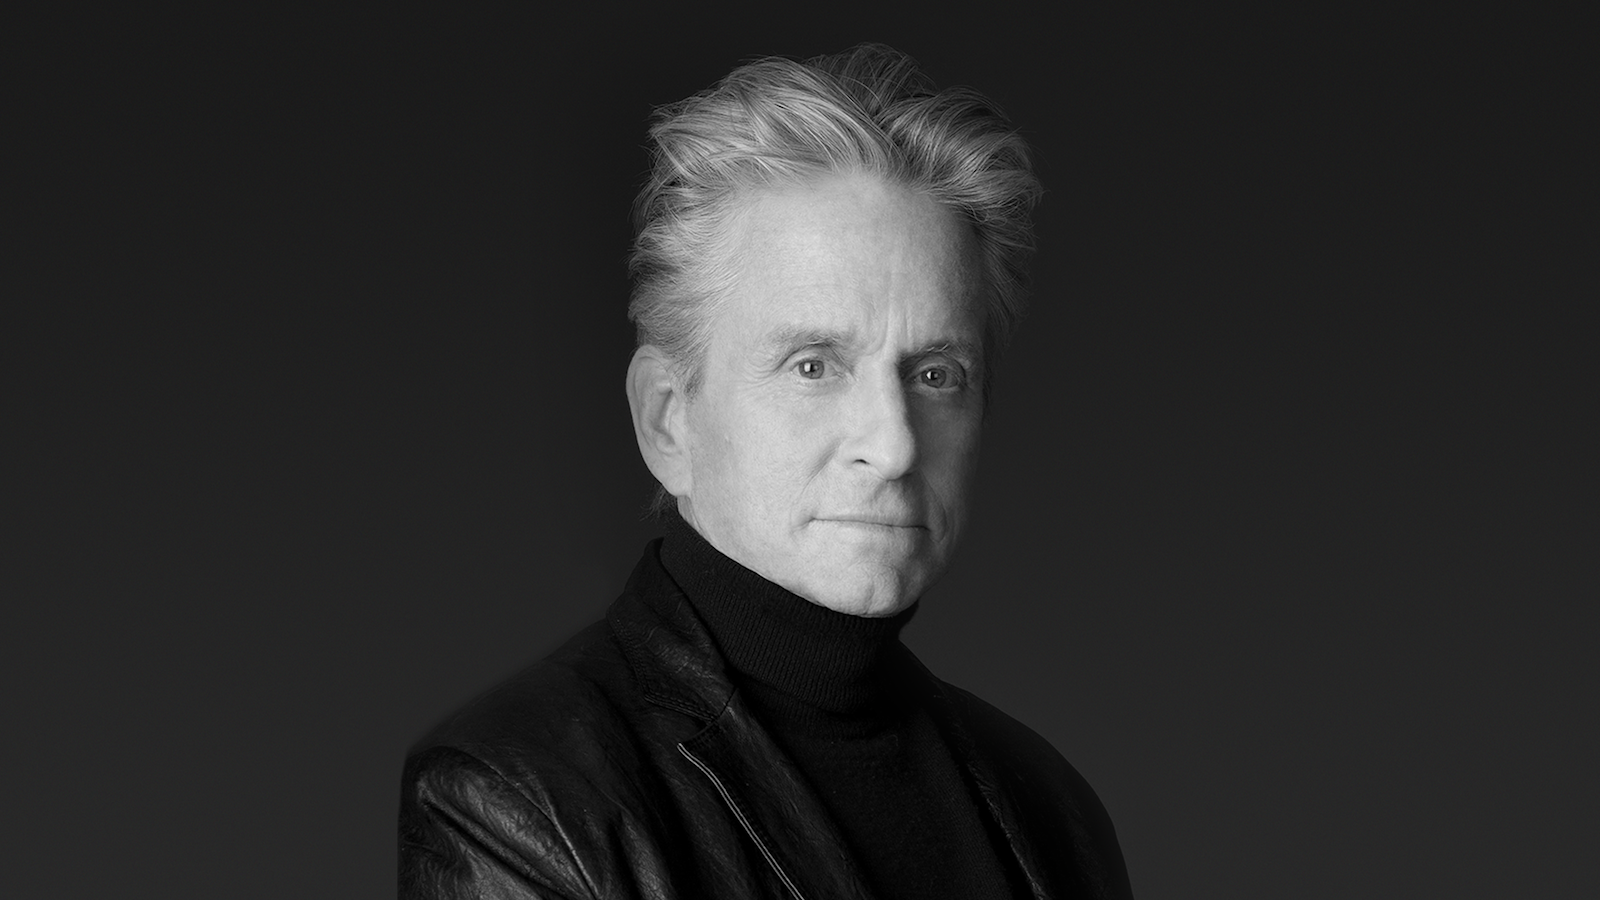 An Evening with Michael Douglas